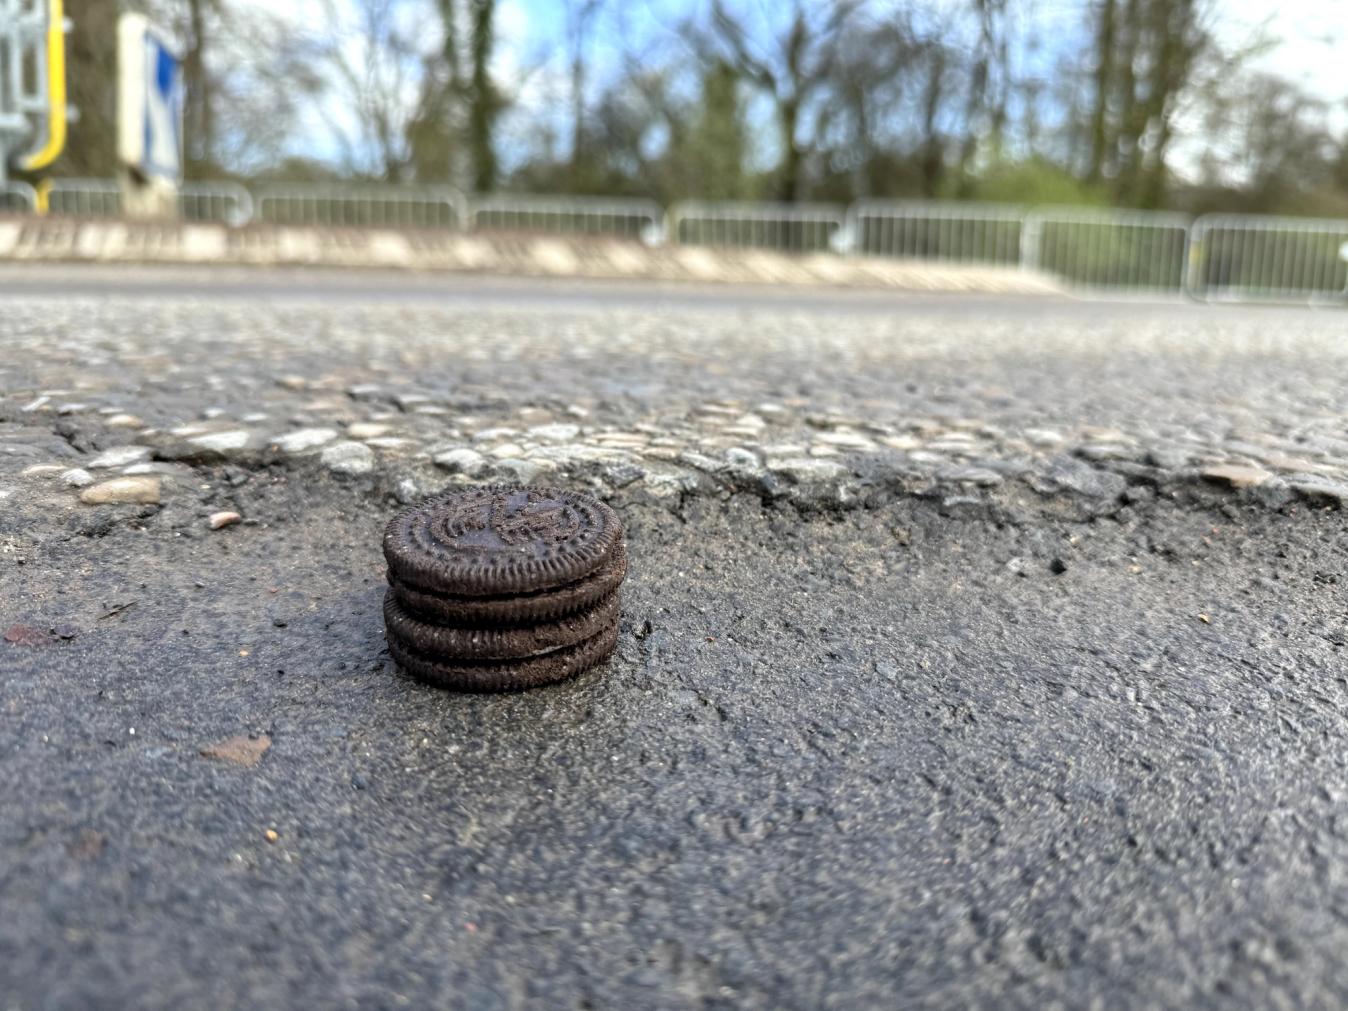 Two Oreos was rather generous, in retrospect